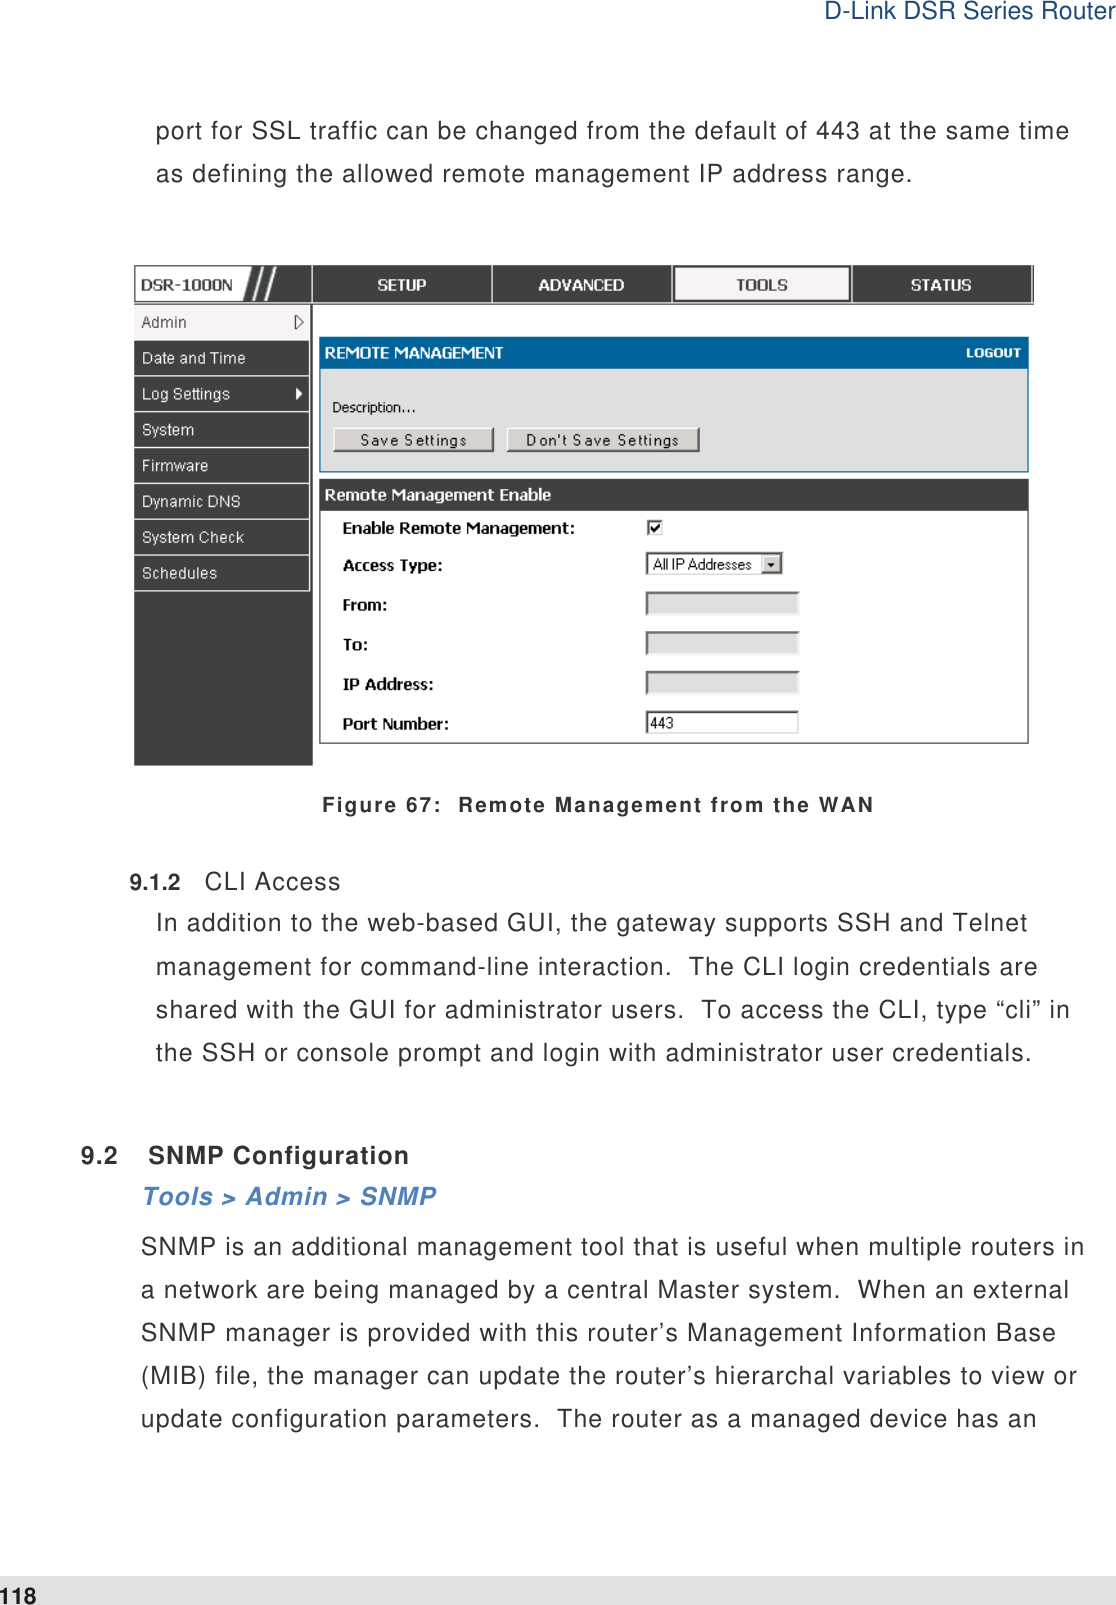 D-Link DSR Series Router 118 port for SSL traffic can be changed from the default of 443 at the same time as defining the allowed remote management IP address range.        Figure 67:  Remote Management from the WAN 9.1.2  CLI Access In addition to the web-based GUI, the gateway supports SSH and Telnet management for command-line interaction.  The CLI login credentials are shared with the GUI for administrator users.  To access the CLI, type “cli” in the SSH or console prompt and login with administrator user credentials.    9.2  SNMP Configuration Tools &gt; Admin &gt; SNMP  SNMP is an additional management tool that is useful when multiple routers in a network are being managed by a central Master system.  When an external SNMP manager is provided with this router’s Management Information Base (MIB) file, the manager can update the router’s hierarchal variables to view or update configuration parameters.  The router as a managed device has an 